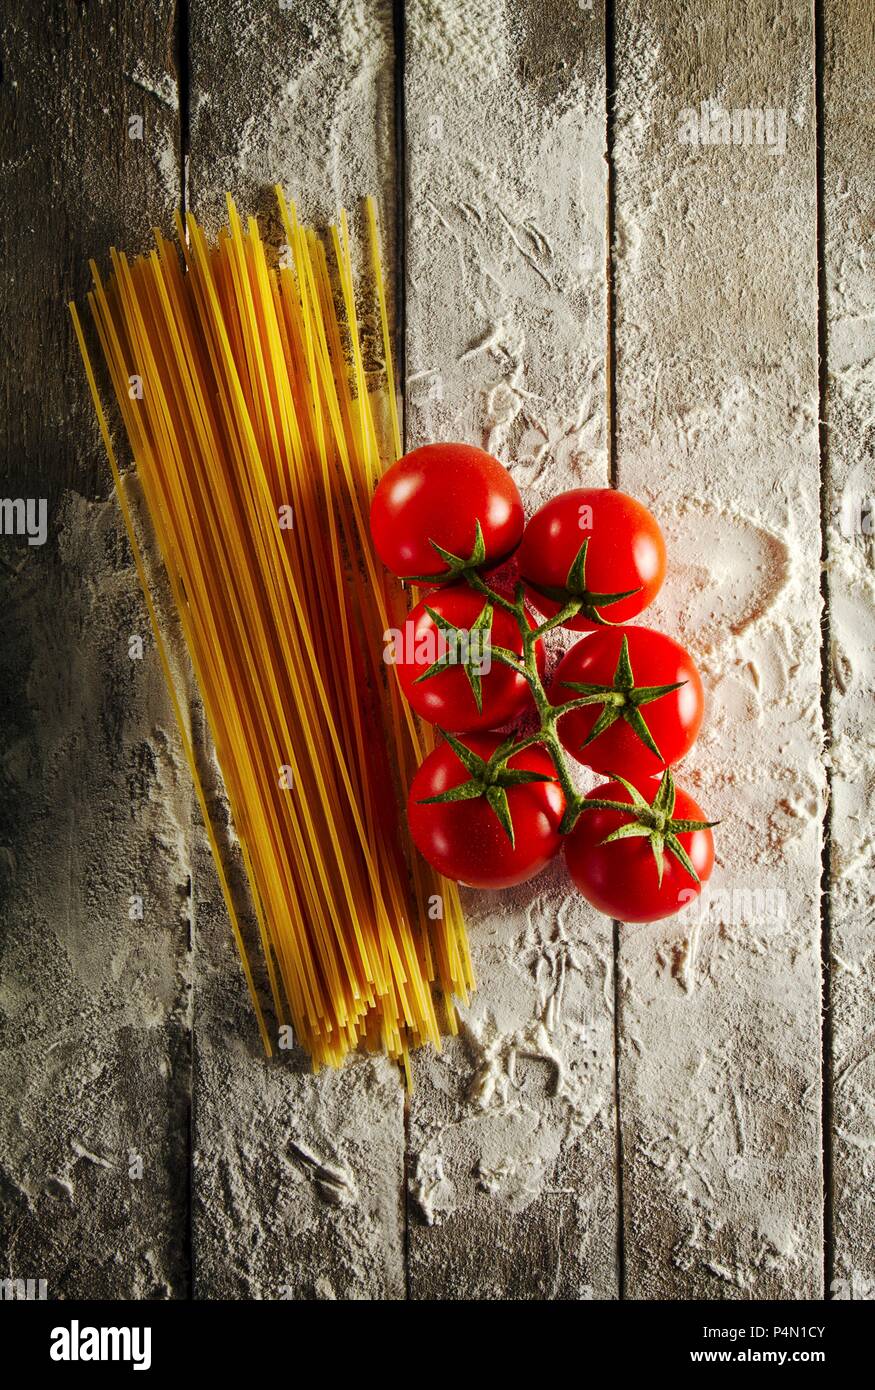 Cherry tomatoes with spaghetti and flour on a wooden table Stock Photo